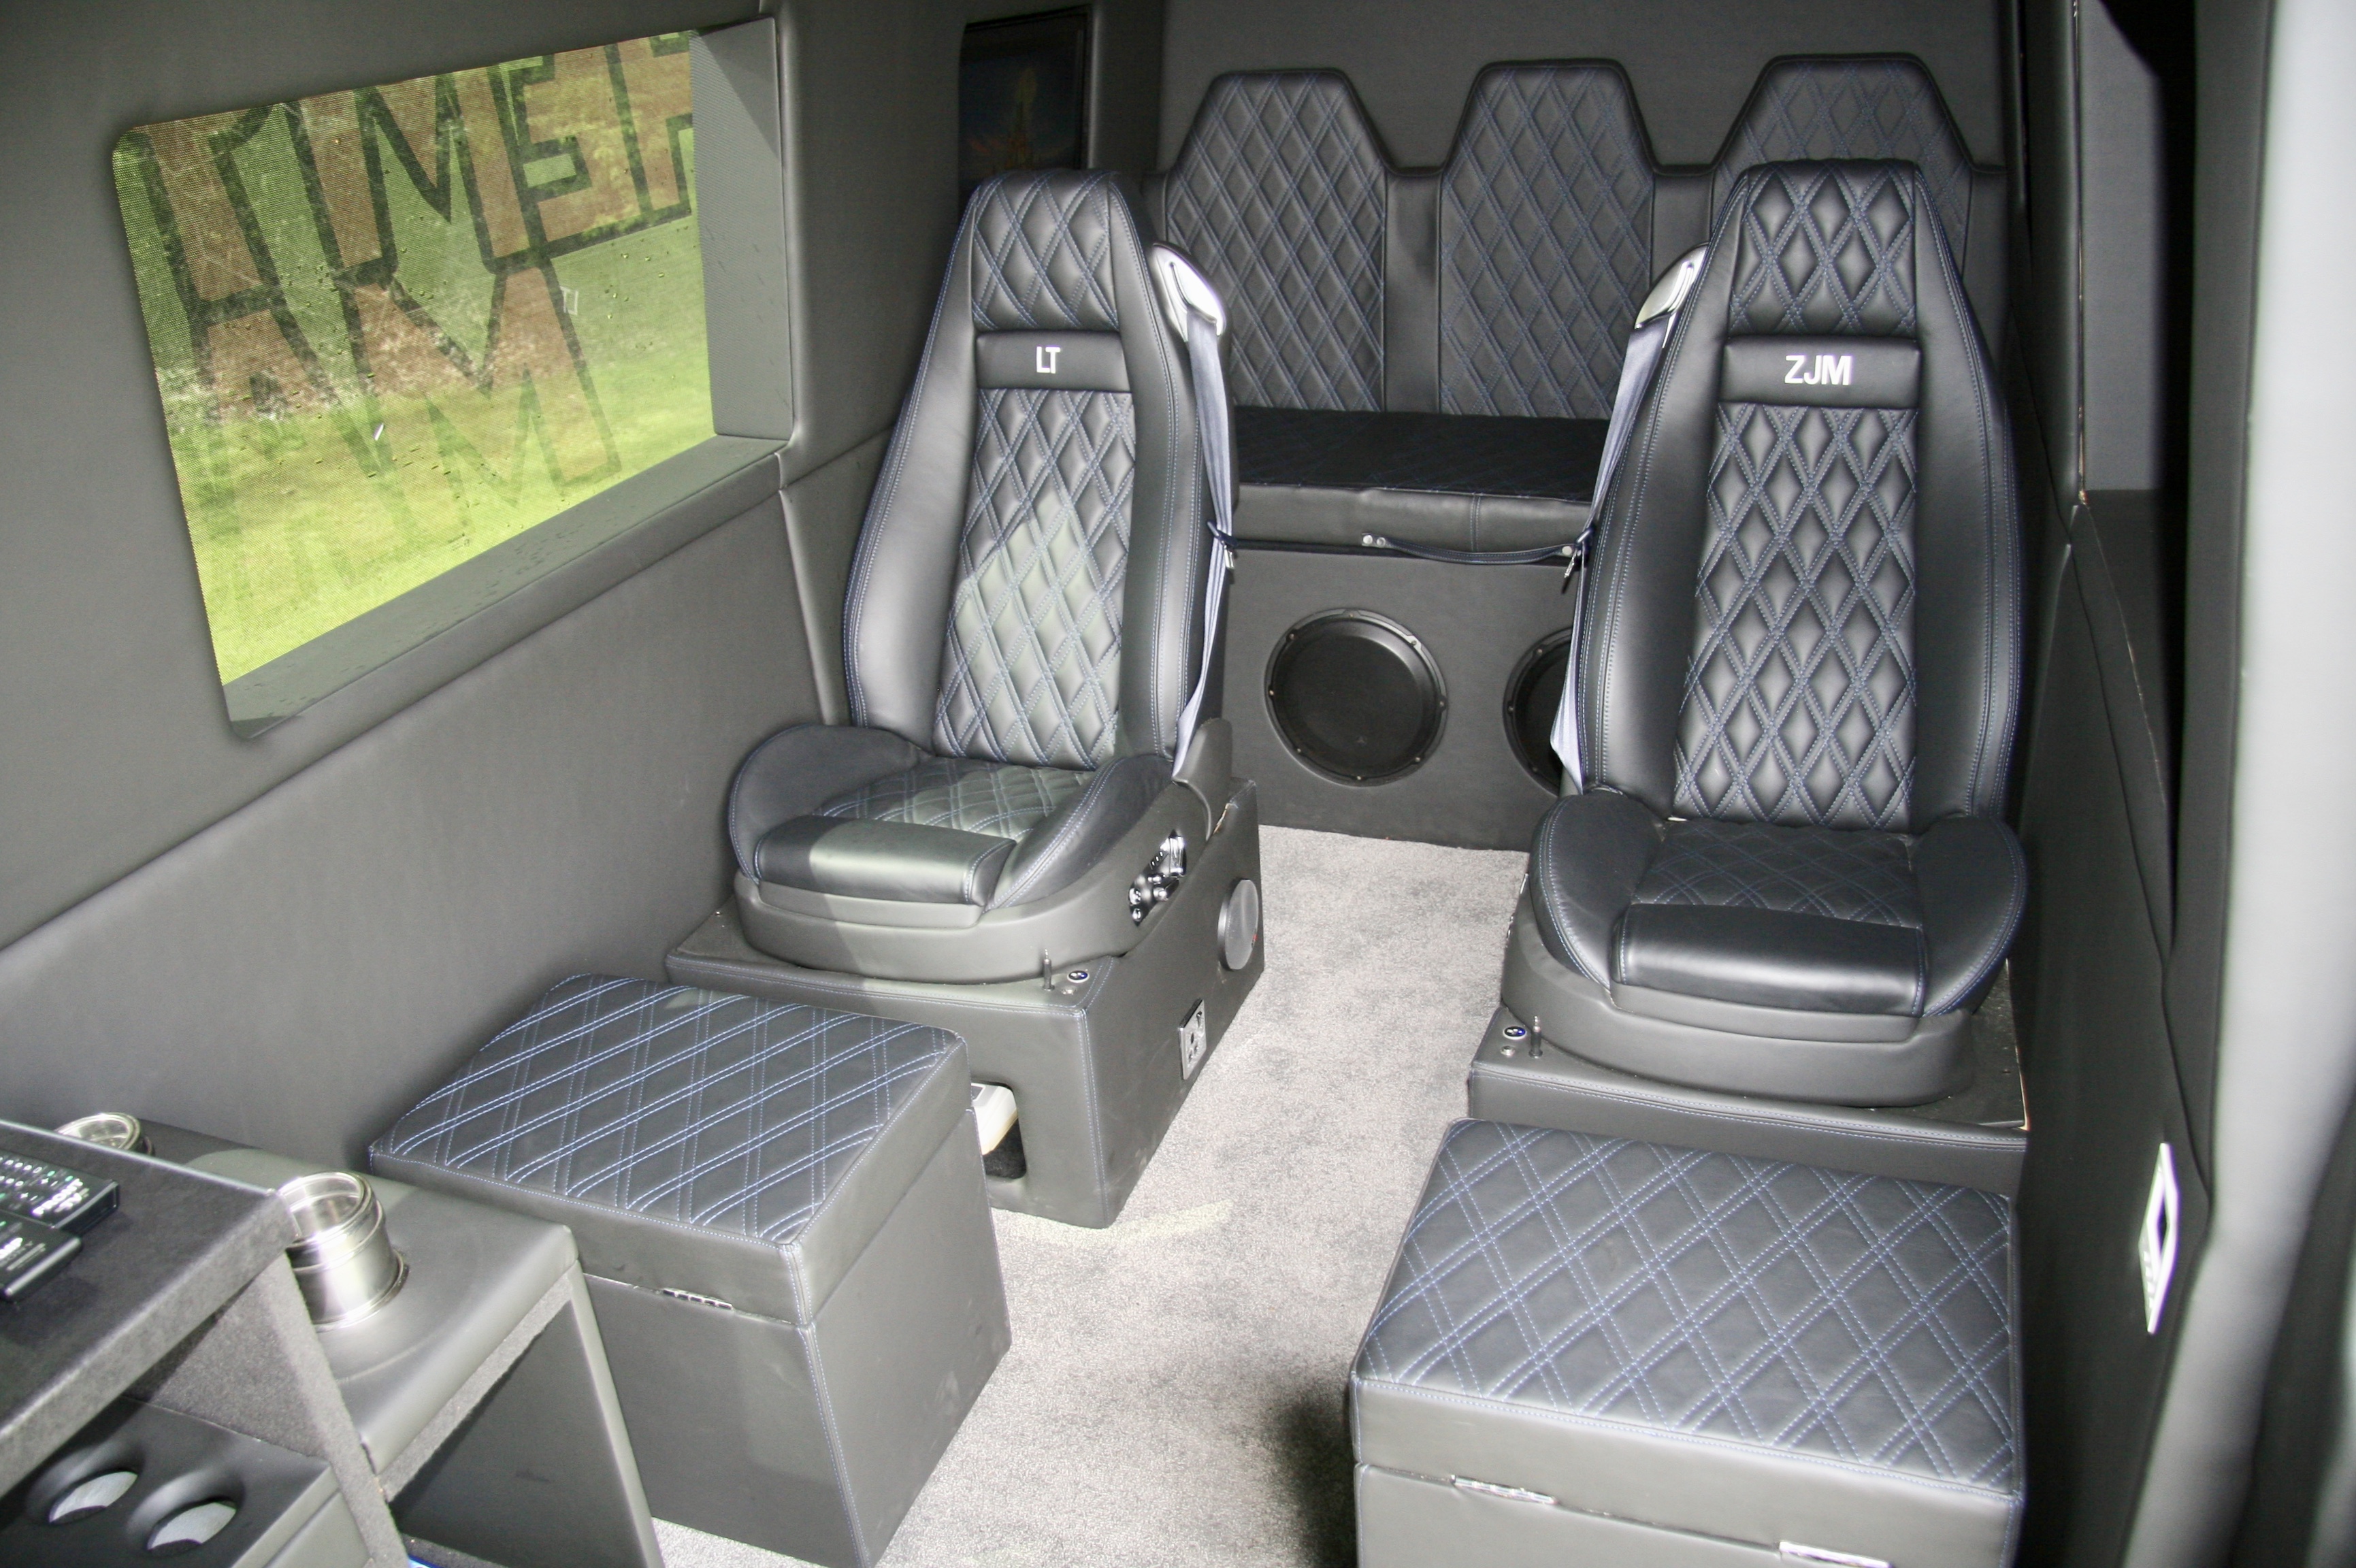 The seats feature leather quilting